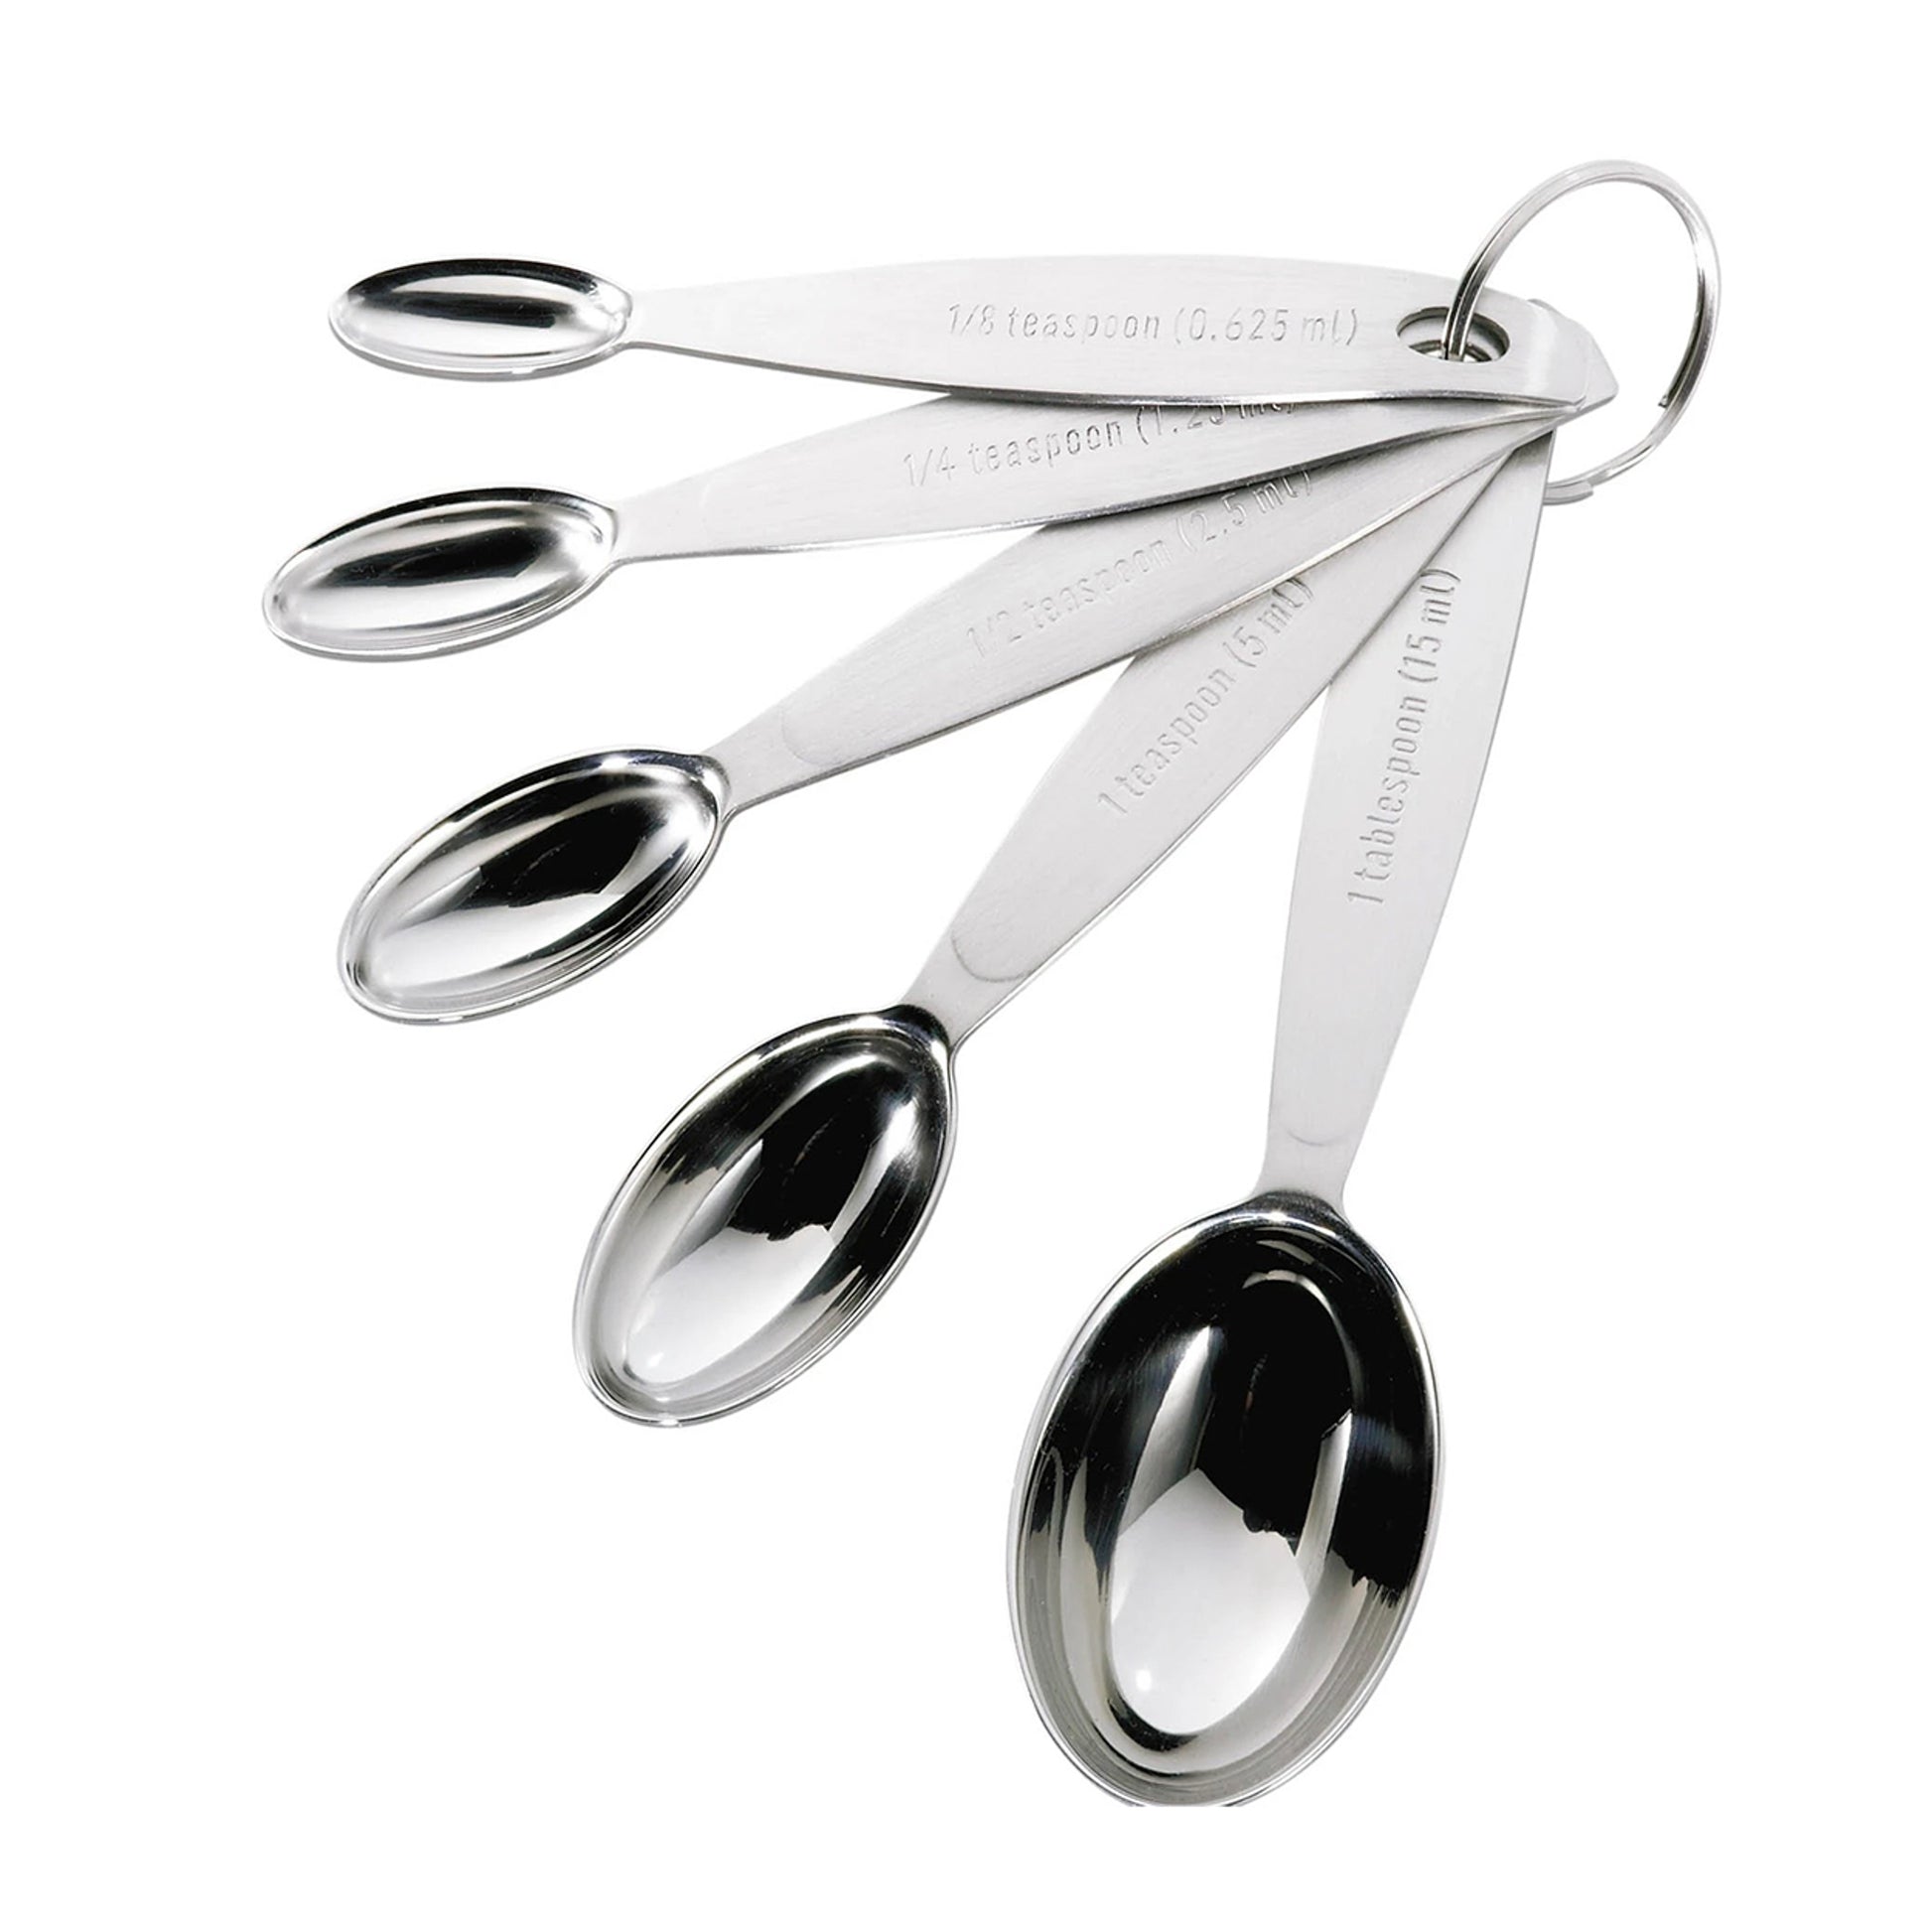 Measuring Spoons - Stainless Steel Teaspoons and Tablespoon